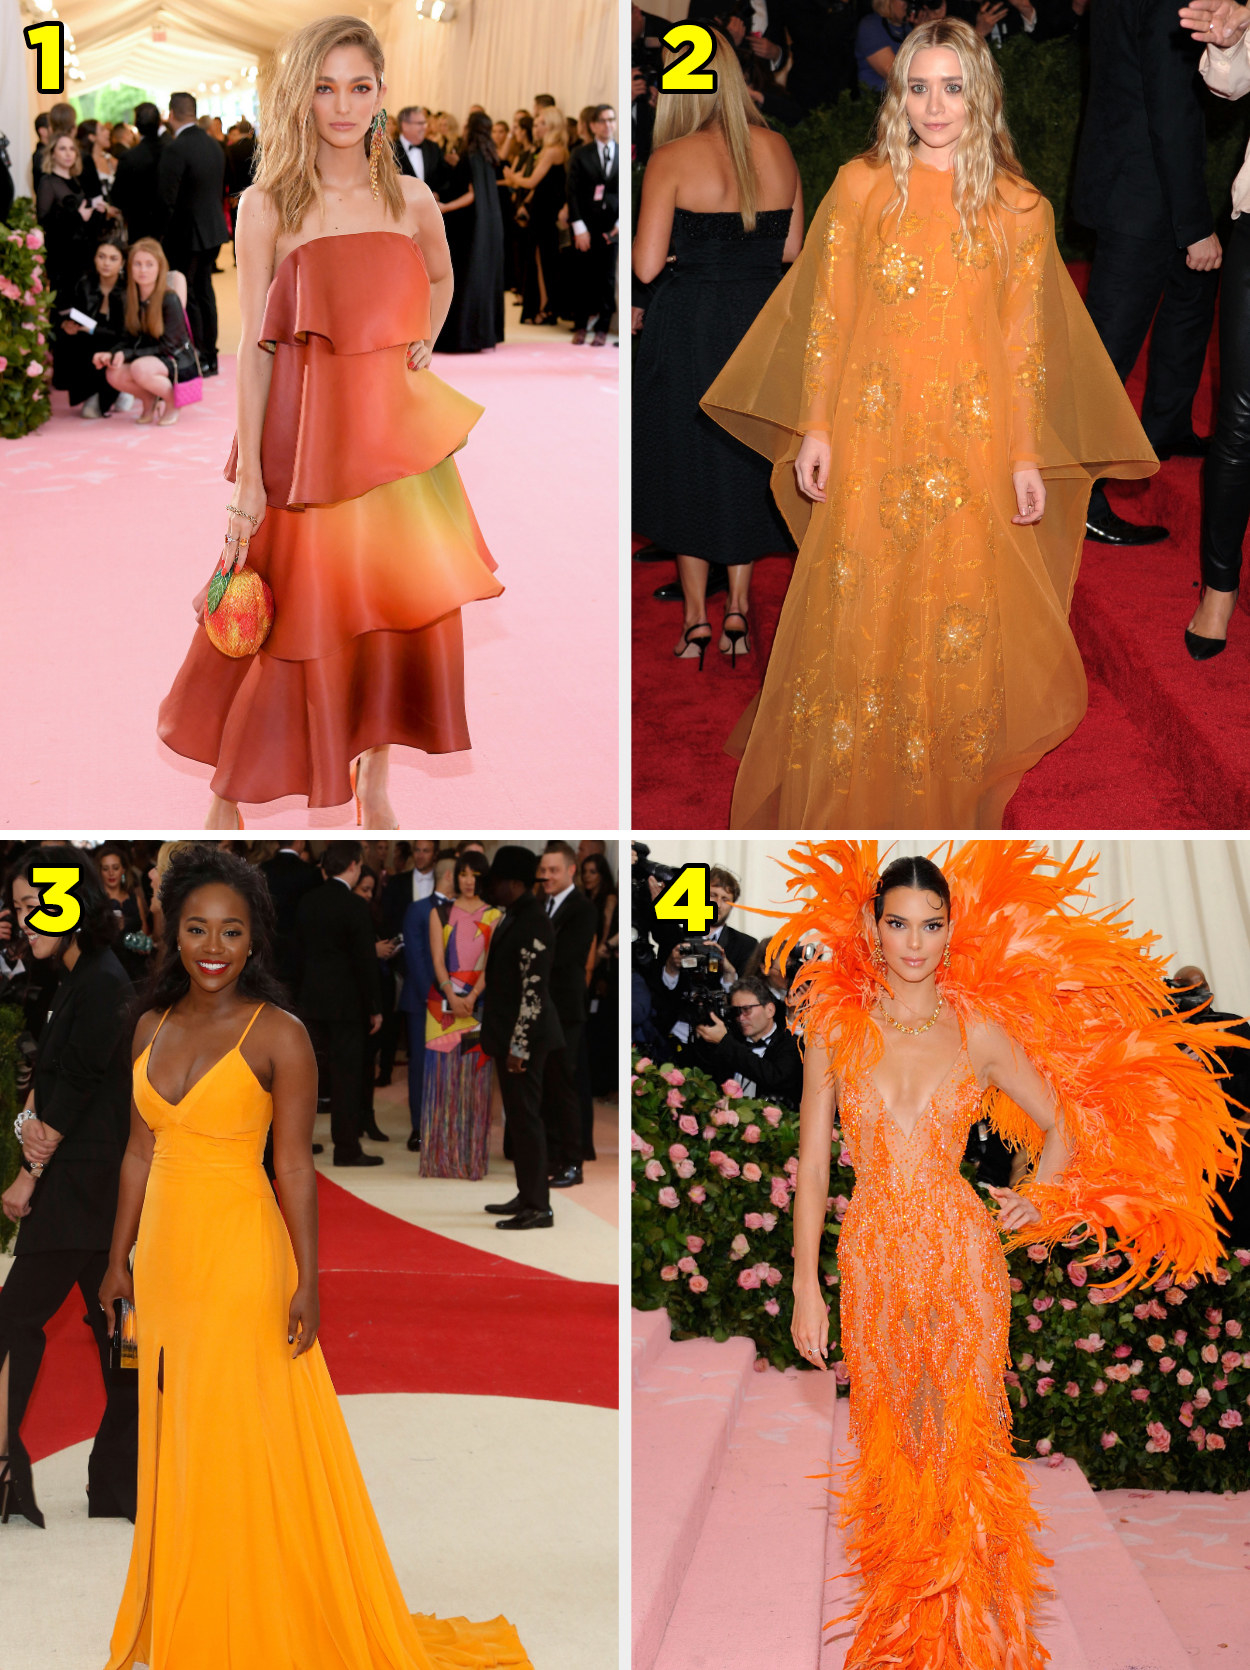 1. A tiered gown with an ombre print. 2. A long-sleeved sparkly gown with a sheer overlay. 3. A simple sleeveless gown. 4 A halter gown covered in sparkly fringe and a giant feather back piece.